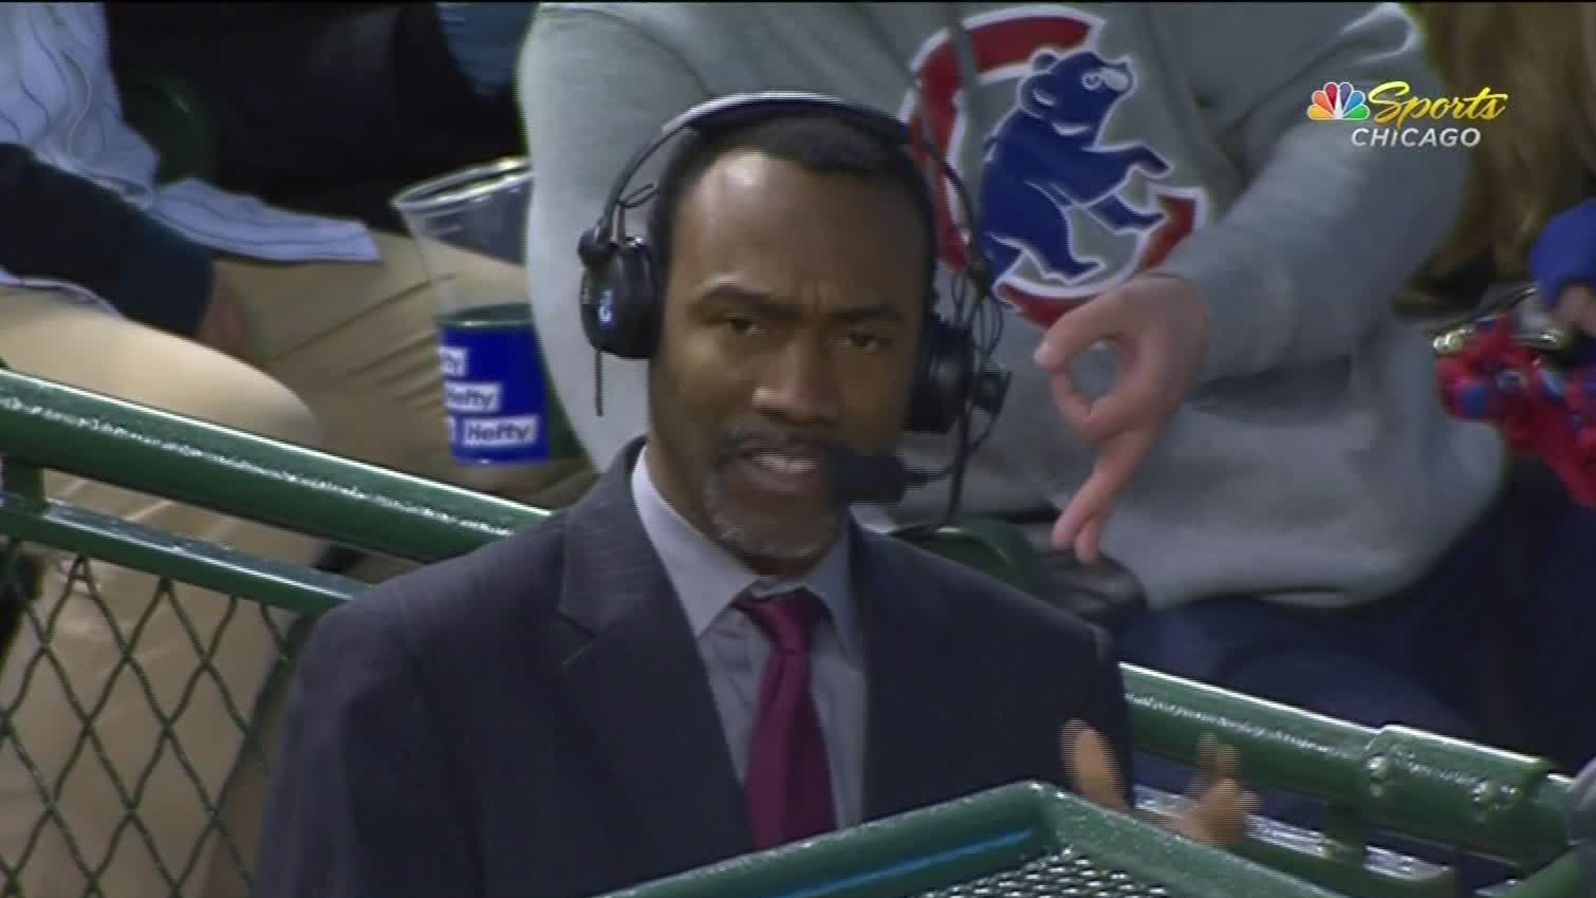 Wrigley Field in Chicago will be off limits indefinitely for a fan after the Cubs acted on the hand gesture behind analyst Doug Glanville.